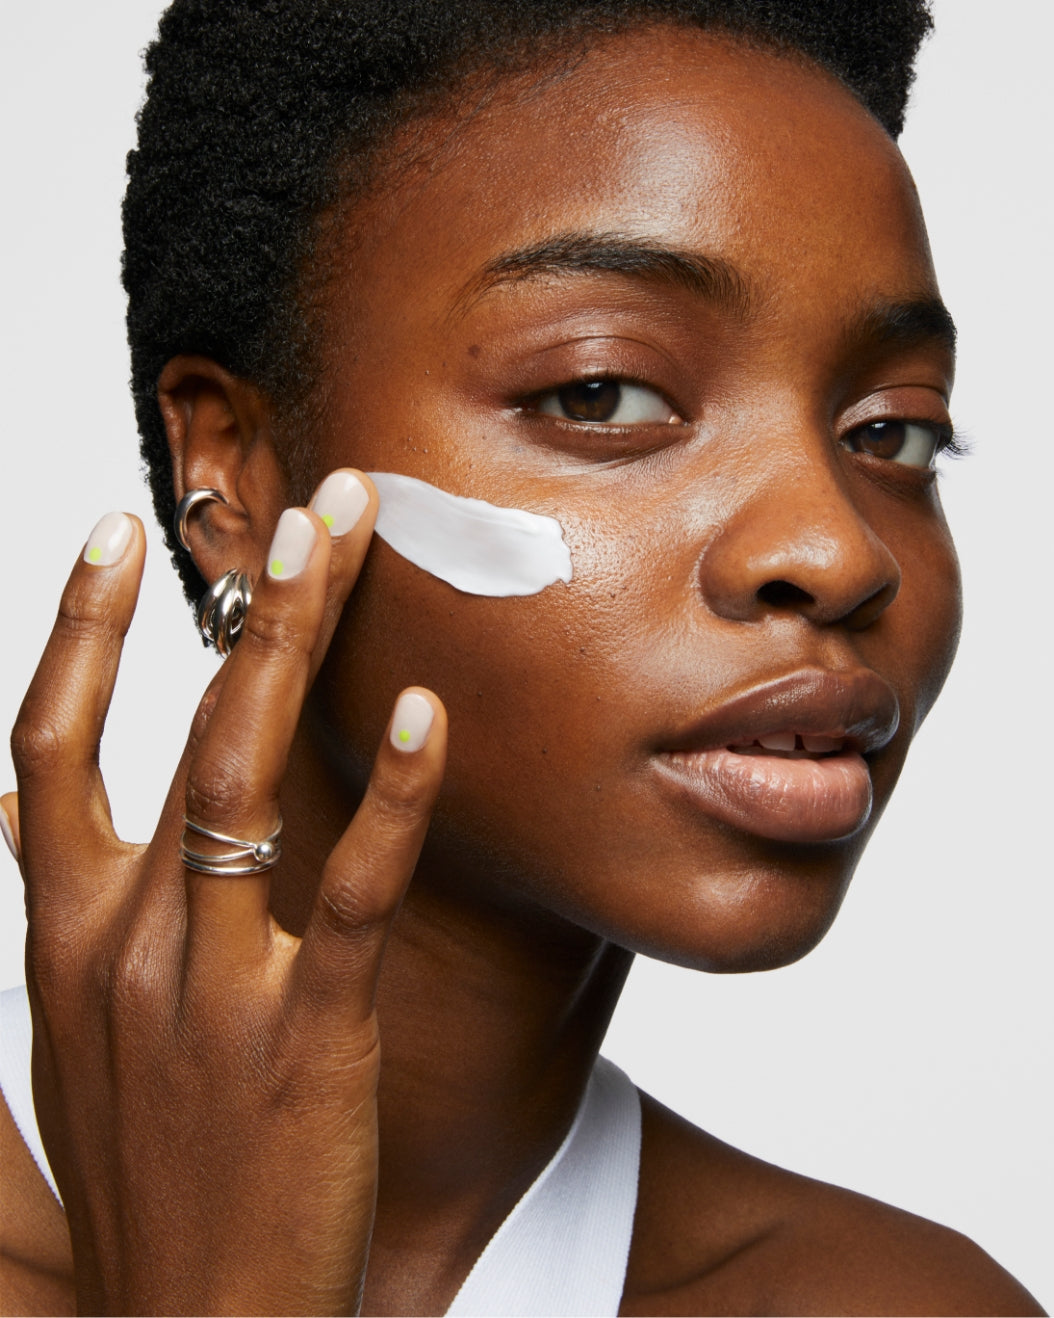 Photo of a model wearing Milk Makeup Products against a white background